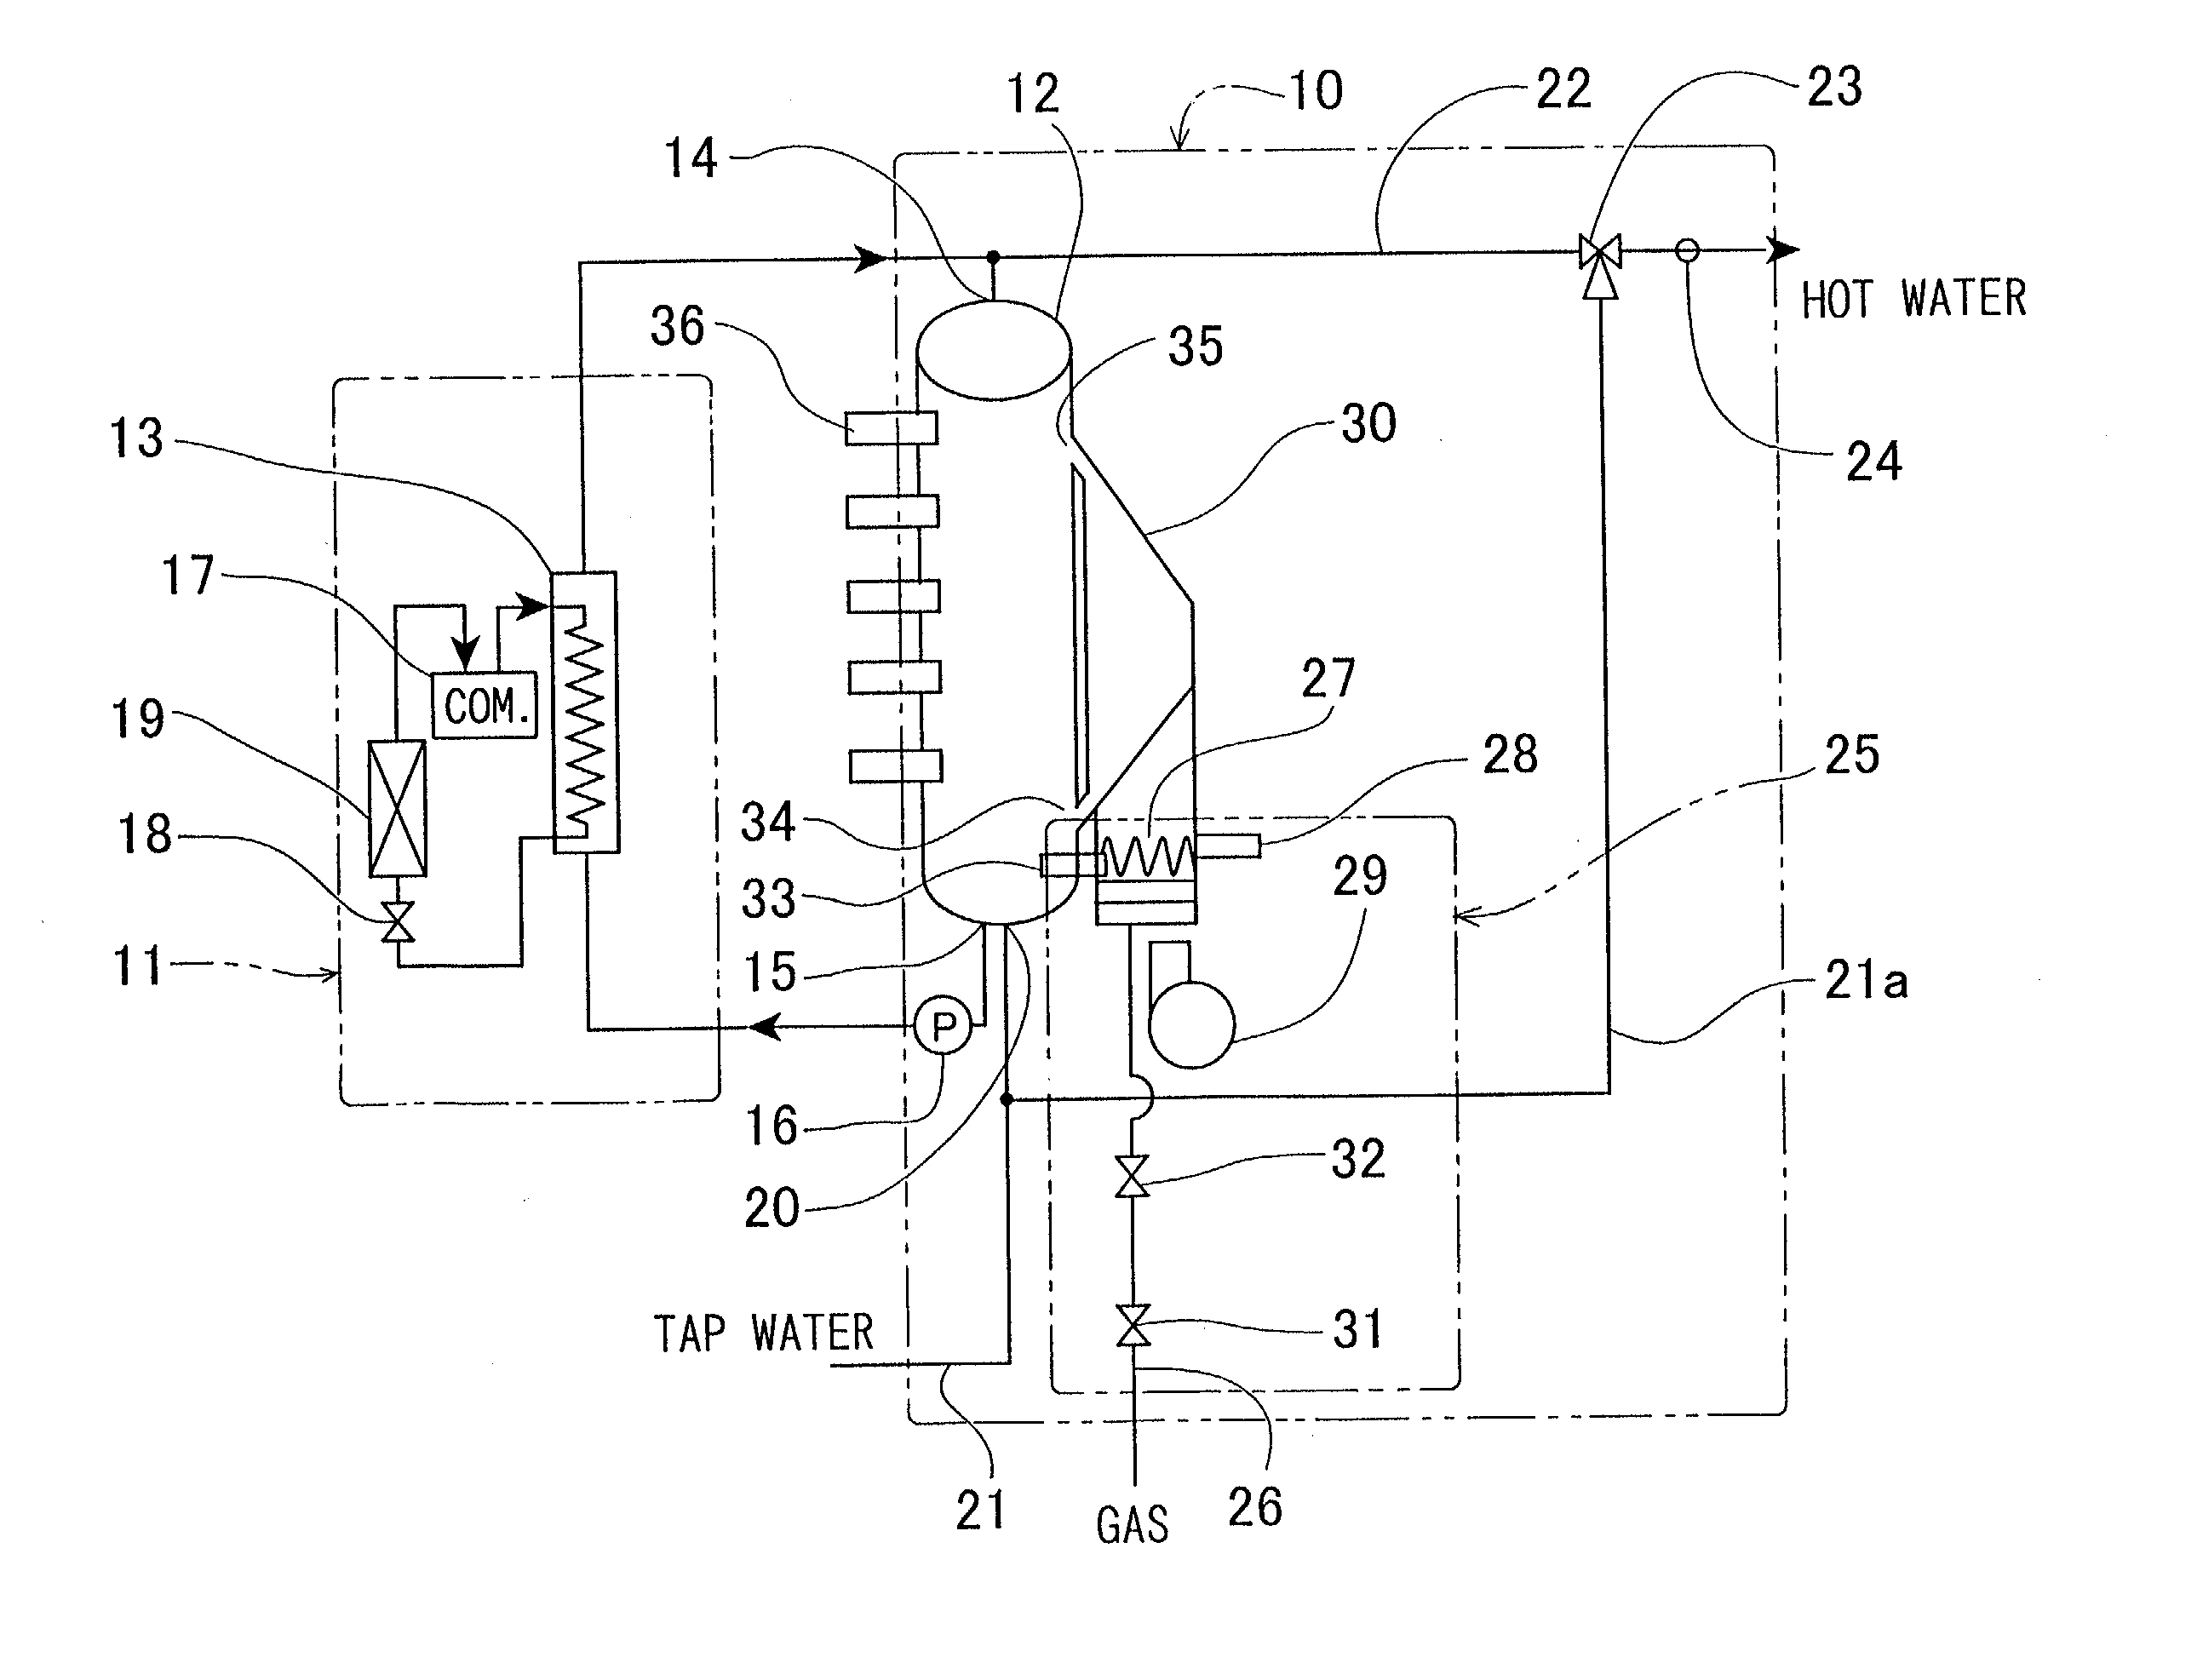 Hybrid water heater with electrical heating unit and combustor